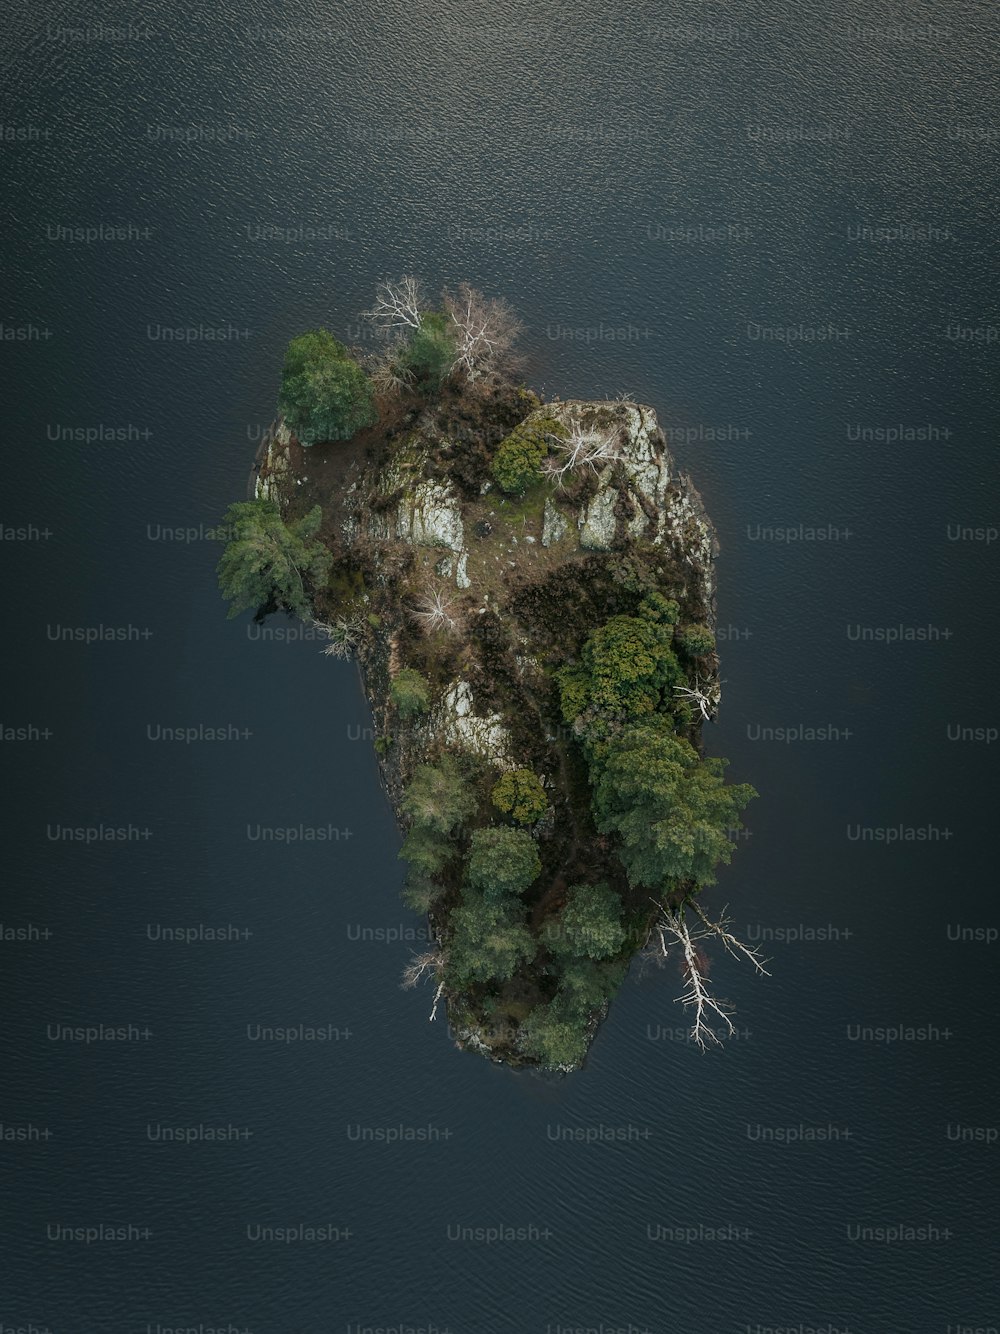 a small island in the middle of a body of water